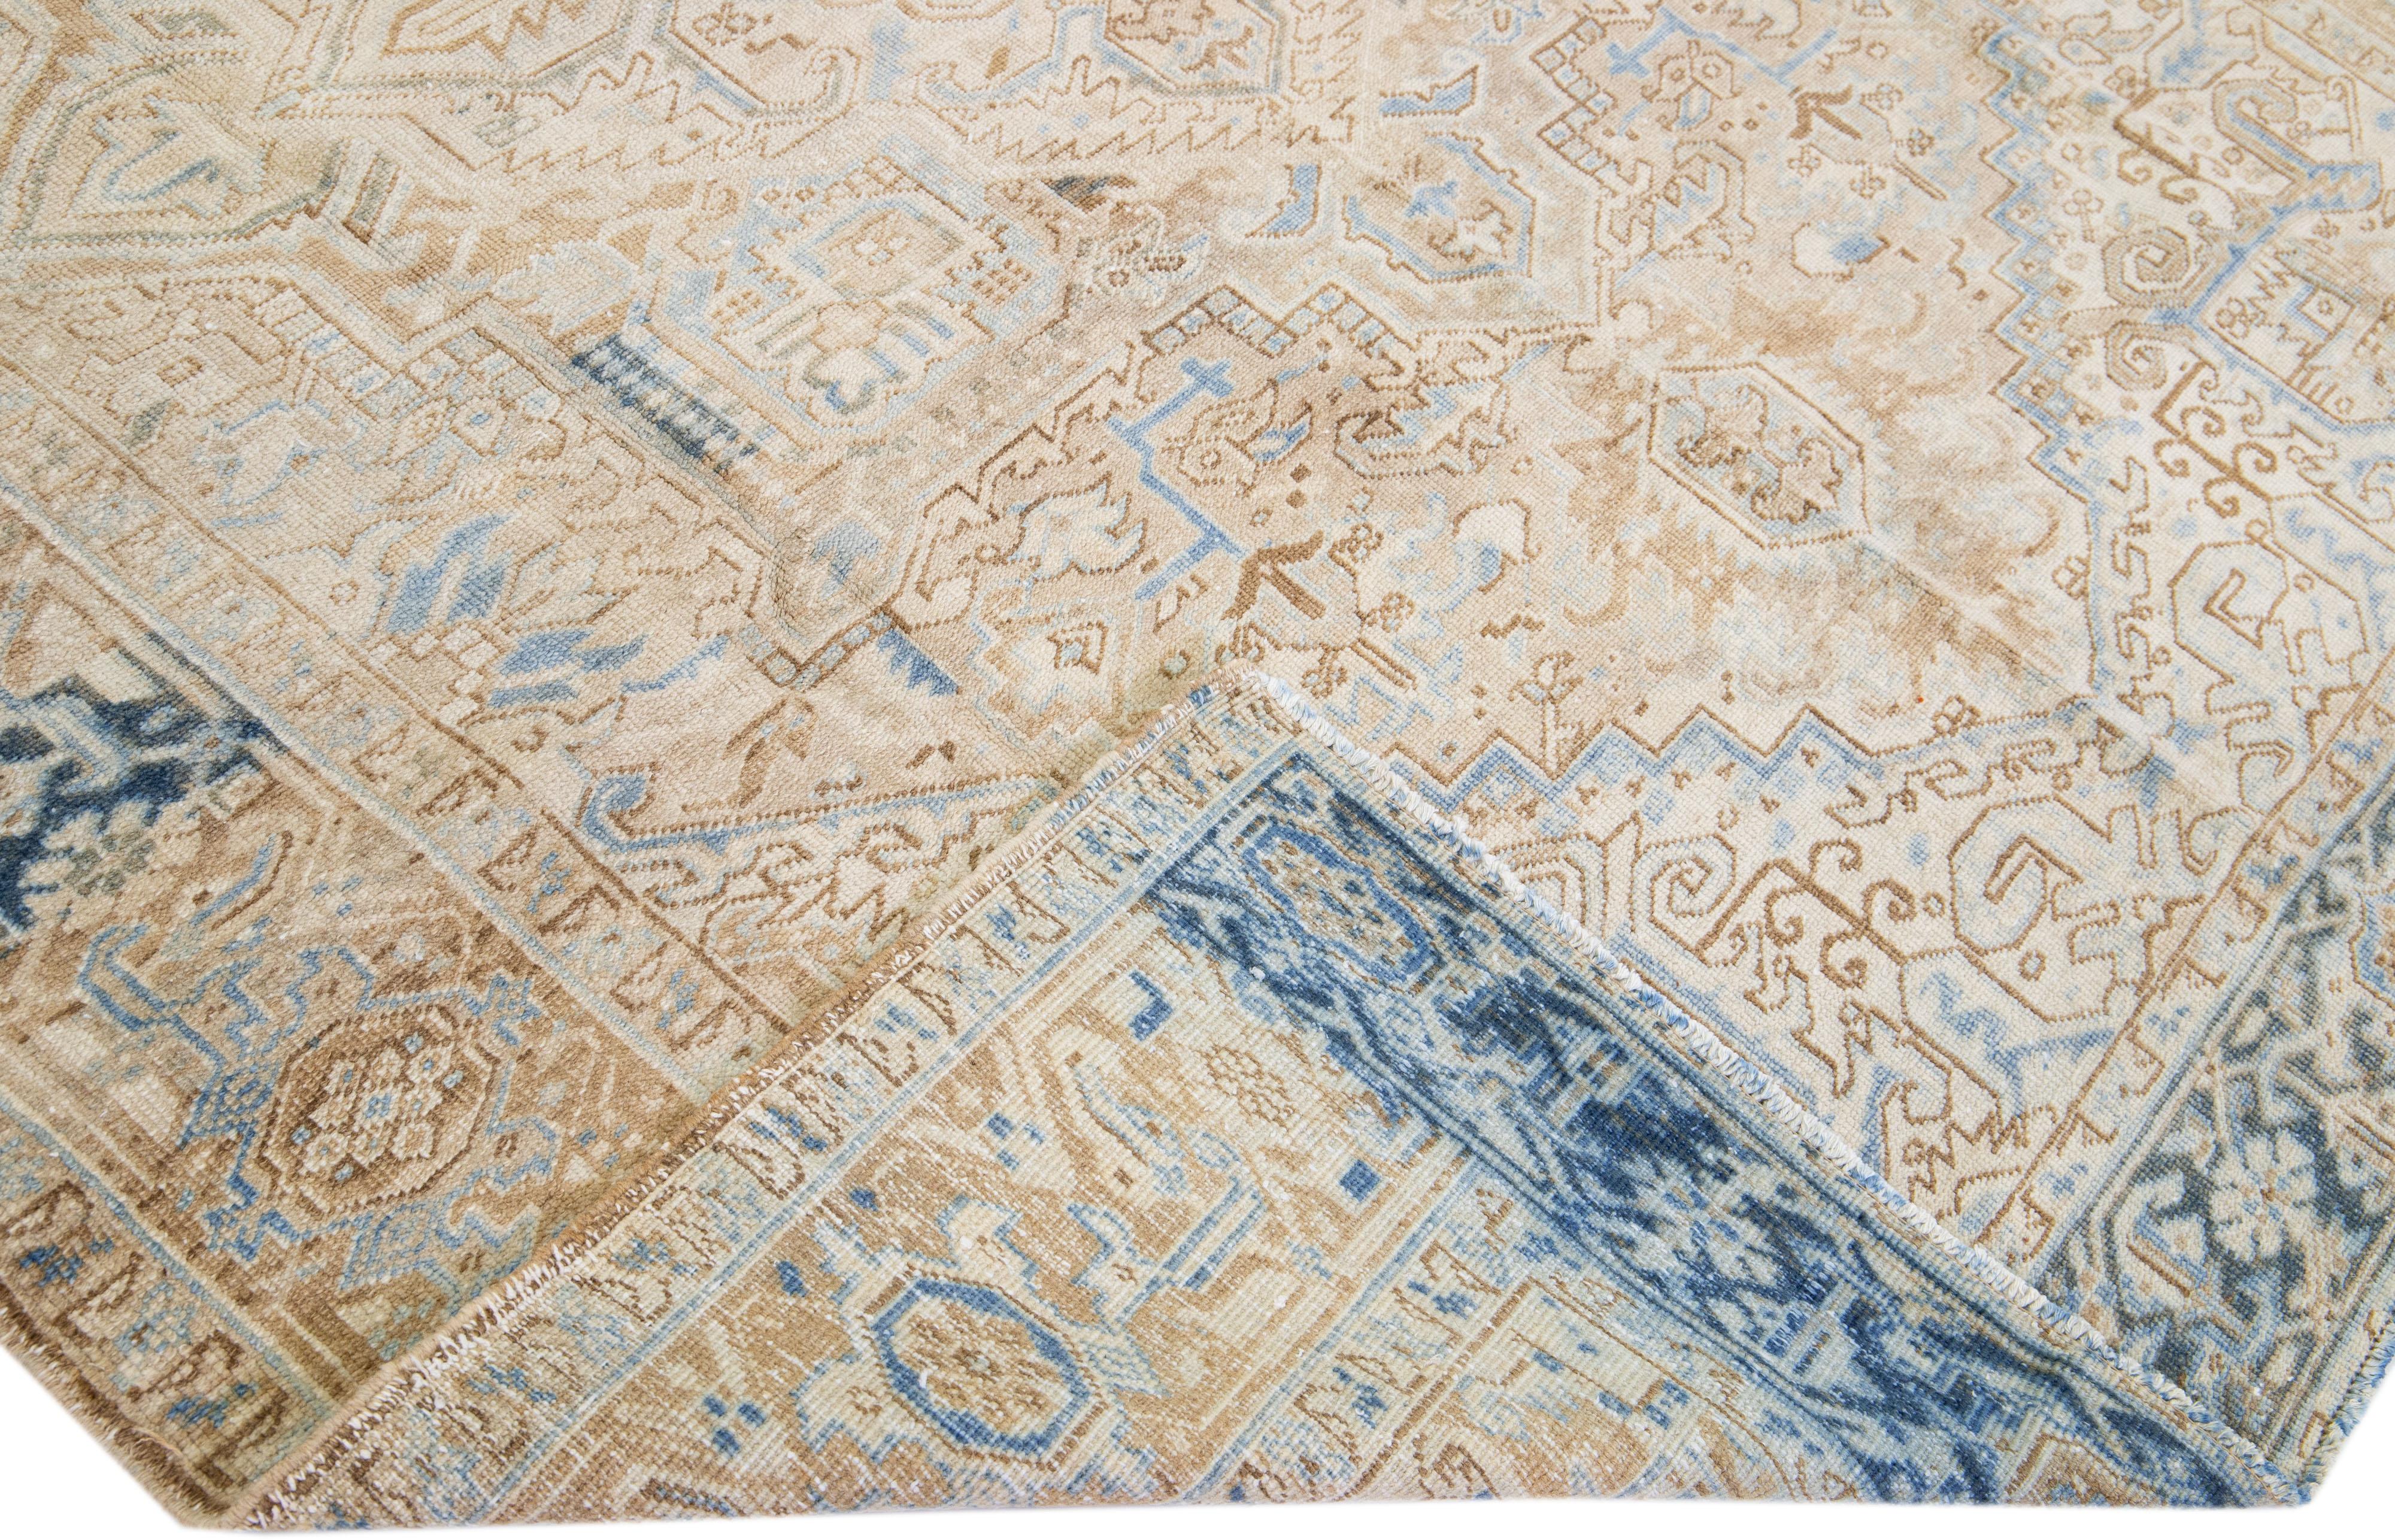 Beautiful antique Heriz hand-knotted wool rug with a beige color field. This Persian rug has blue accents in a gorgeous all-over geometric medallion design.

This rug measures: 8'1